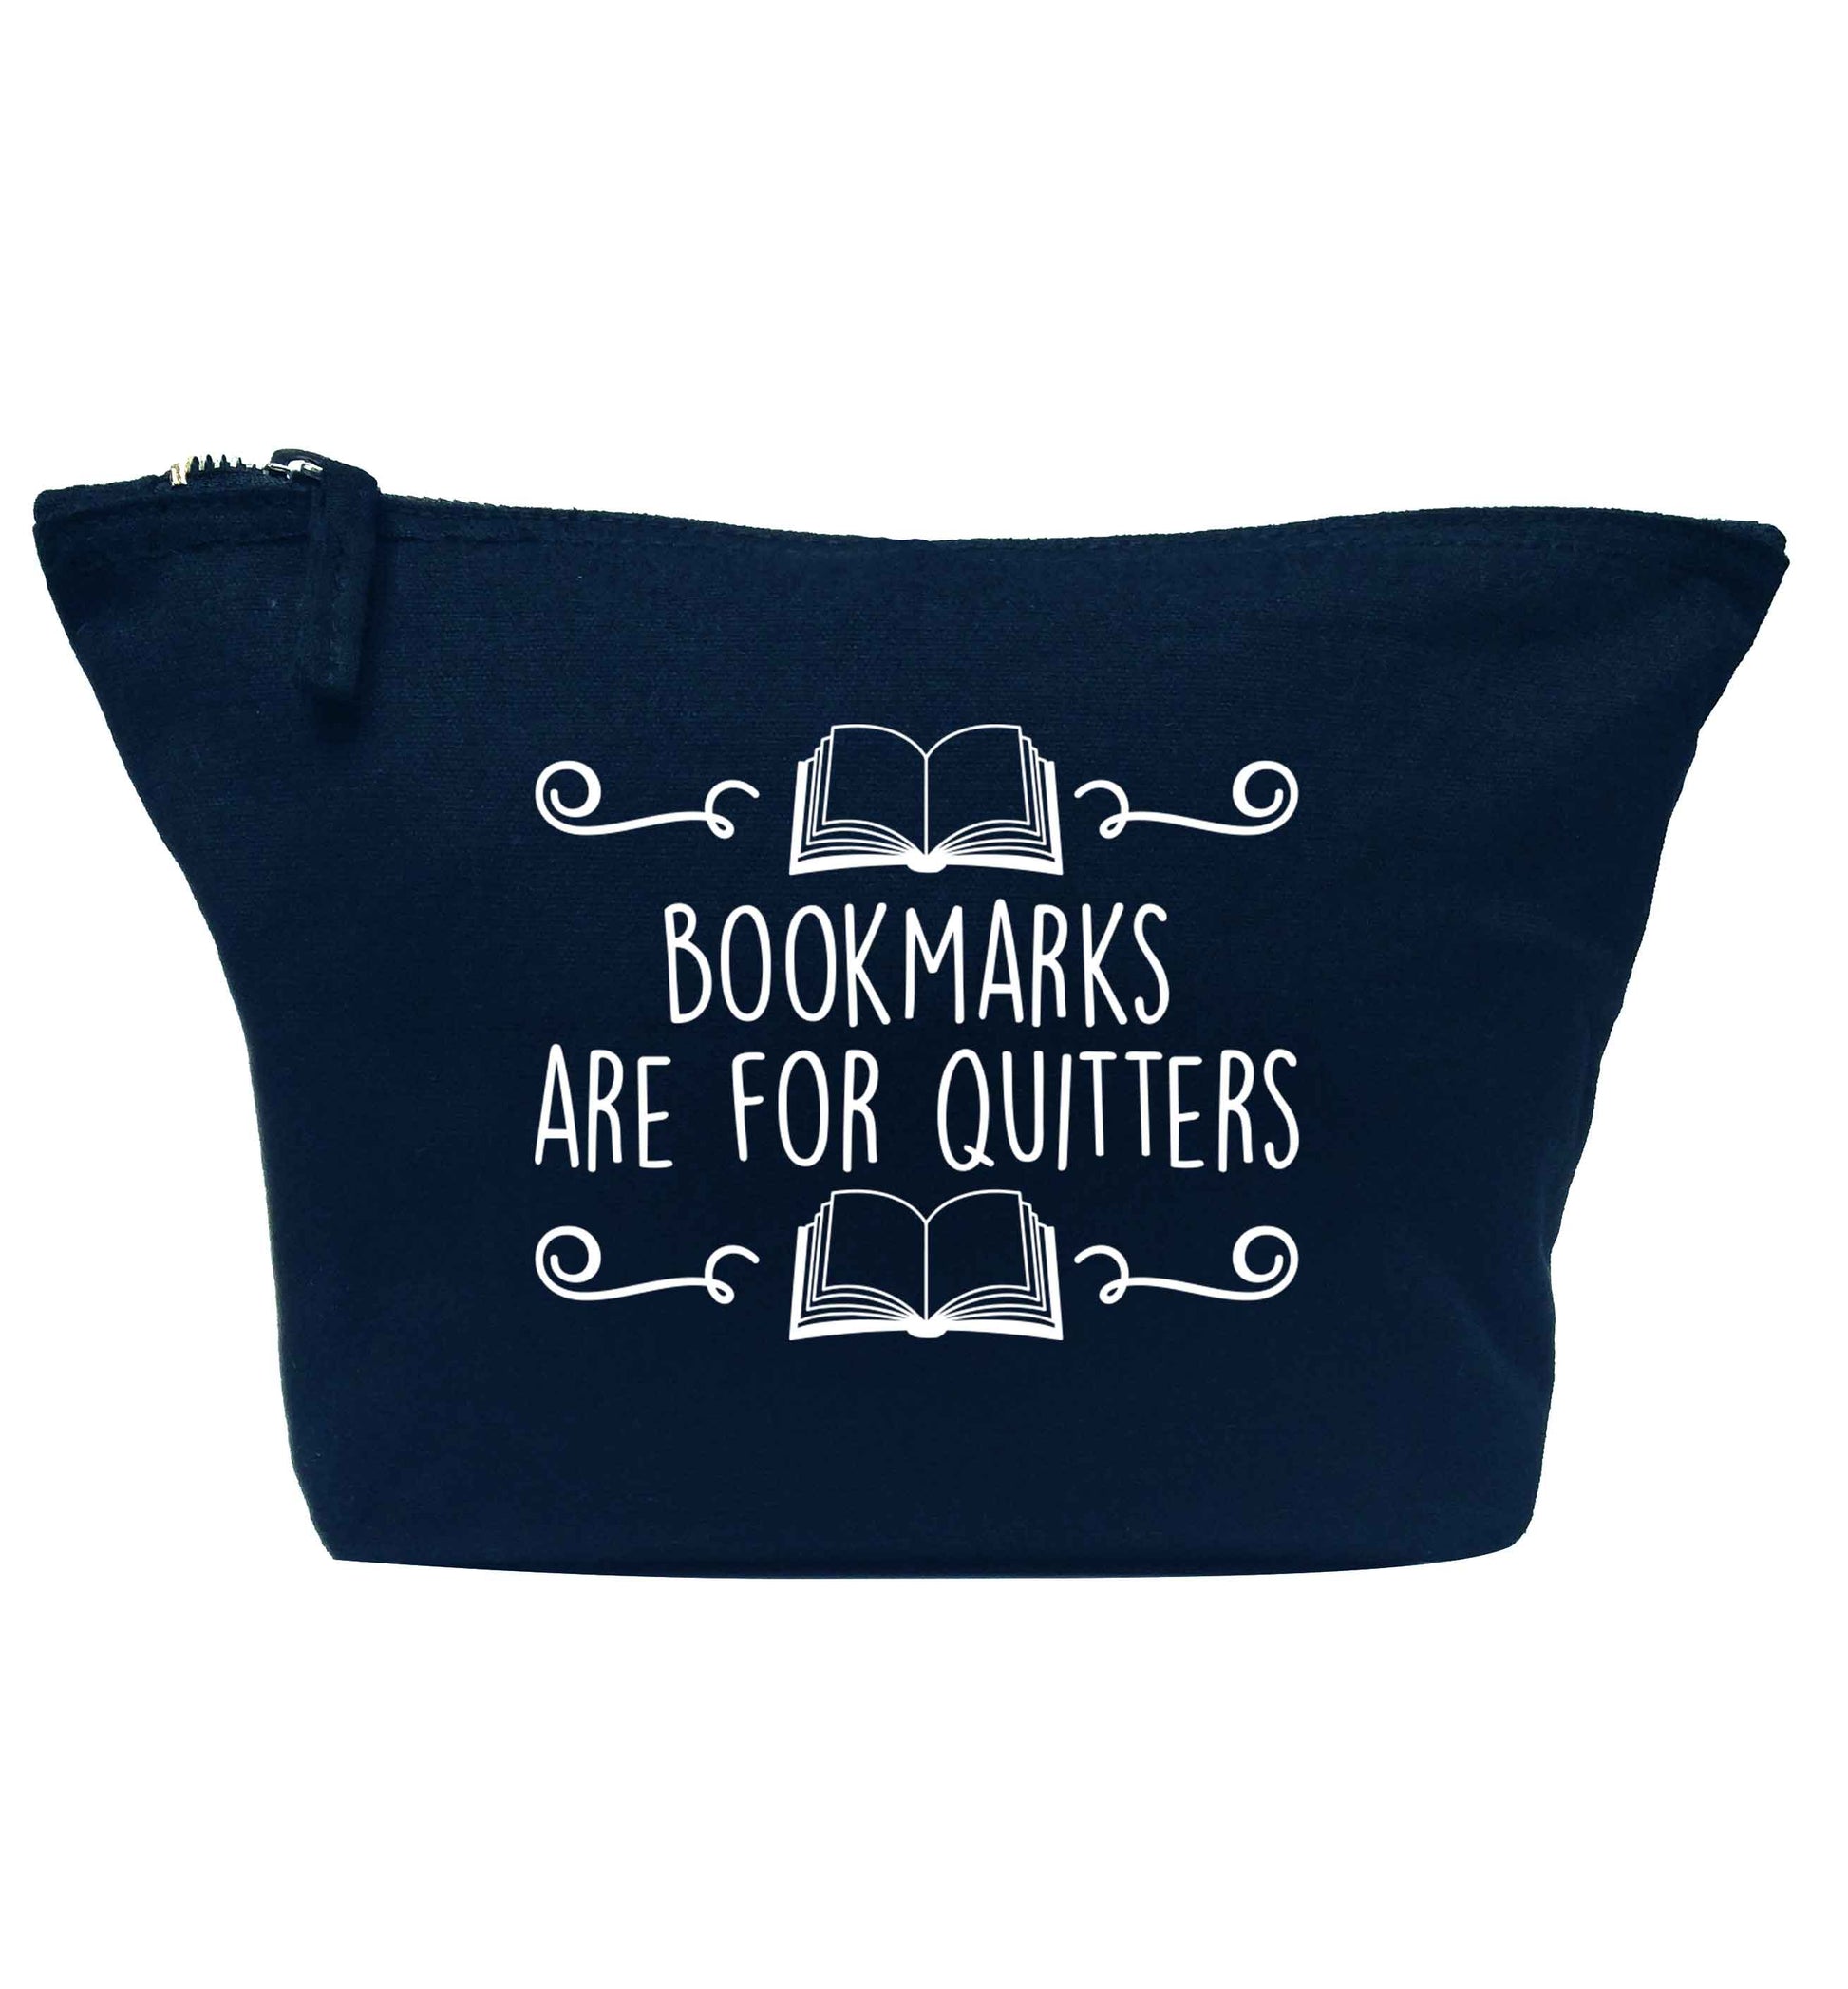 Bookmarks are for quitters navy makeup bag